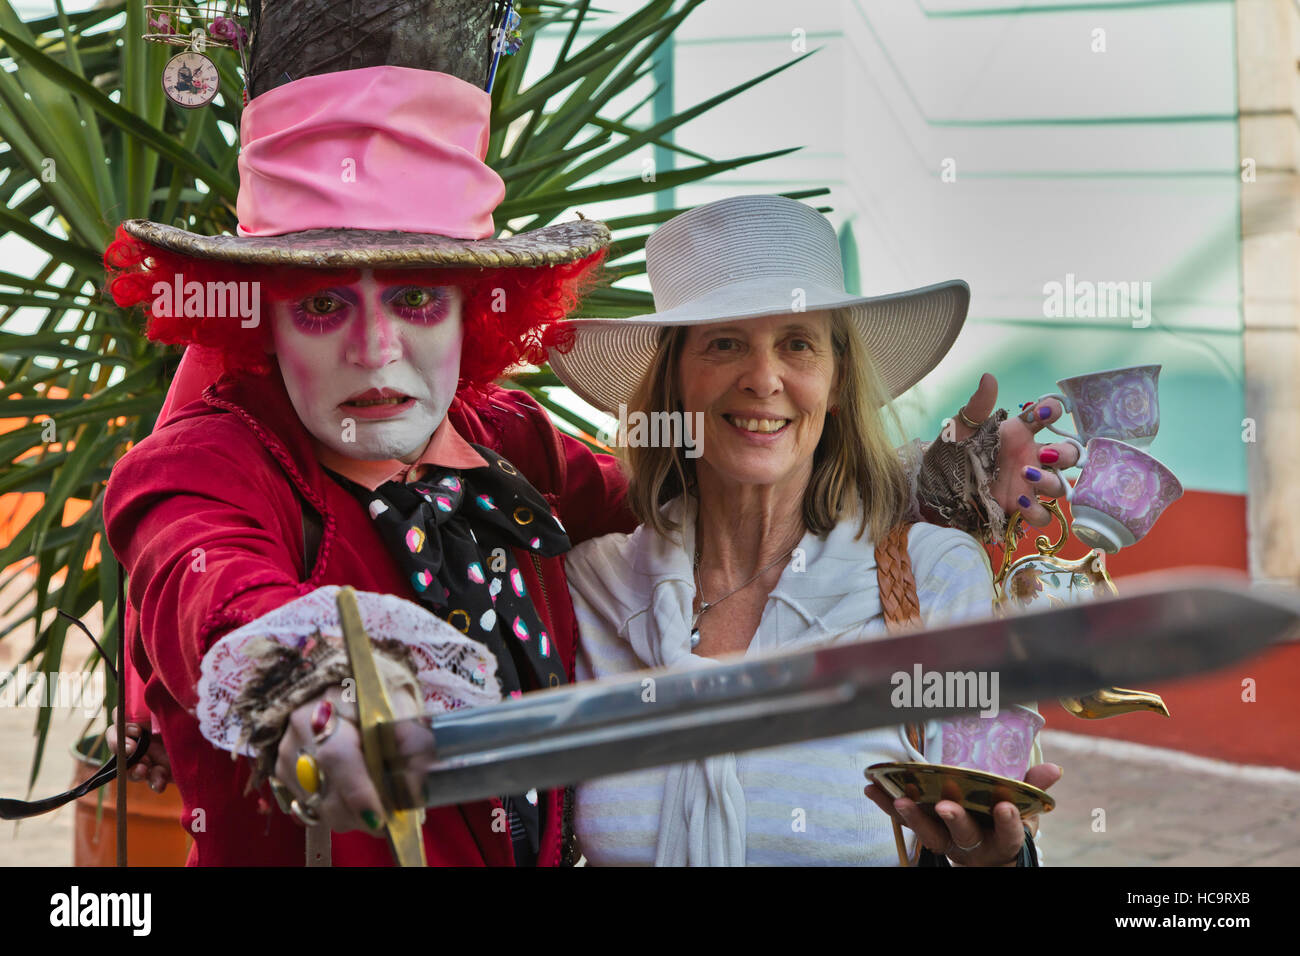 A street preformer dressed as a ALICE IN WONDERLAND CHARACTER during the Cerventino Festival - GUANAJUATO, MEXICO Stock Photo